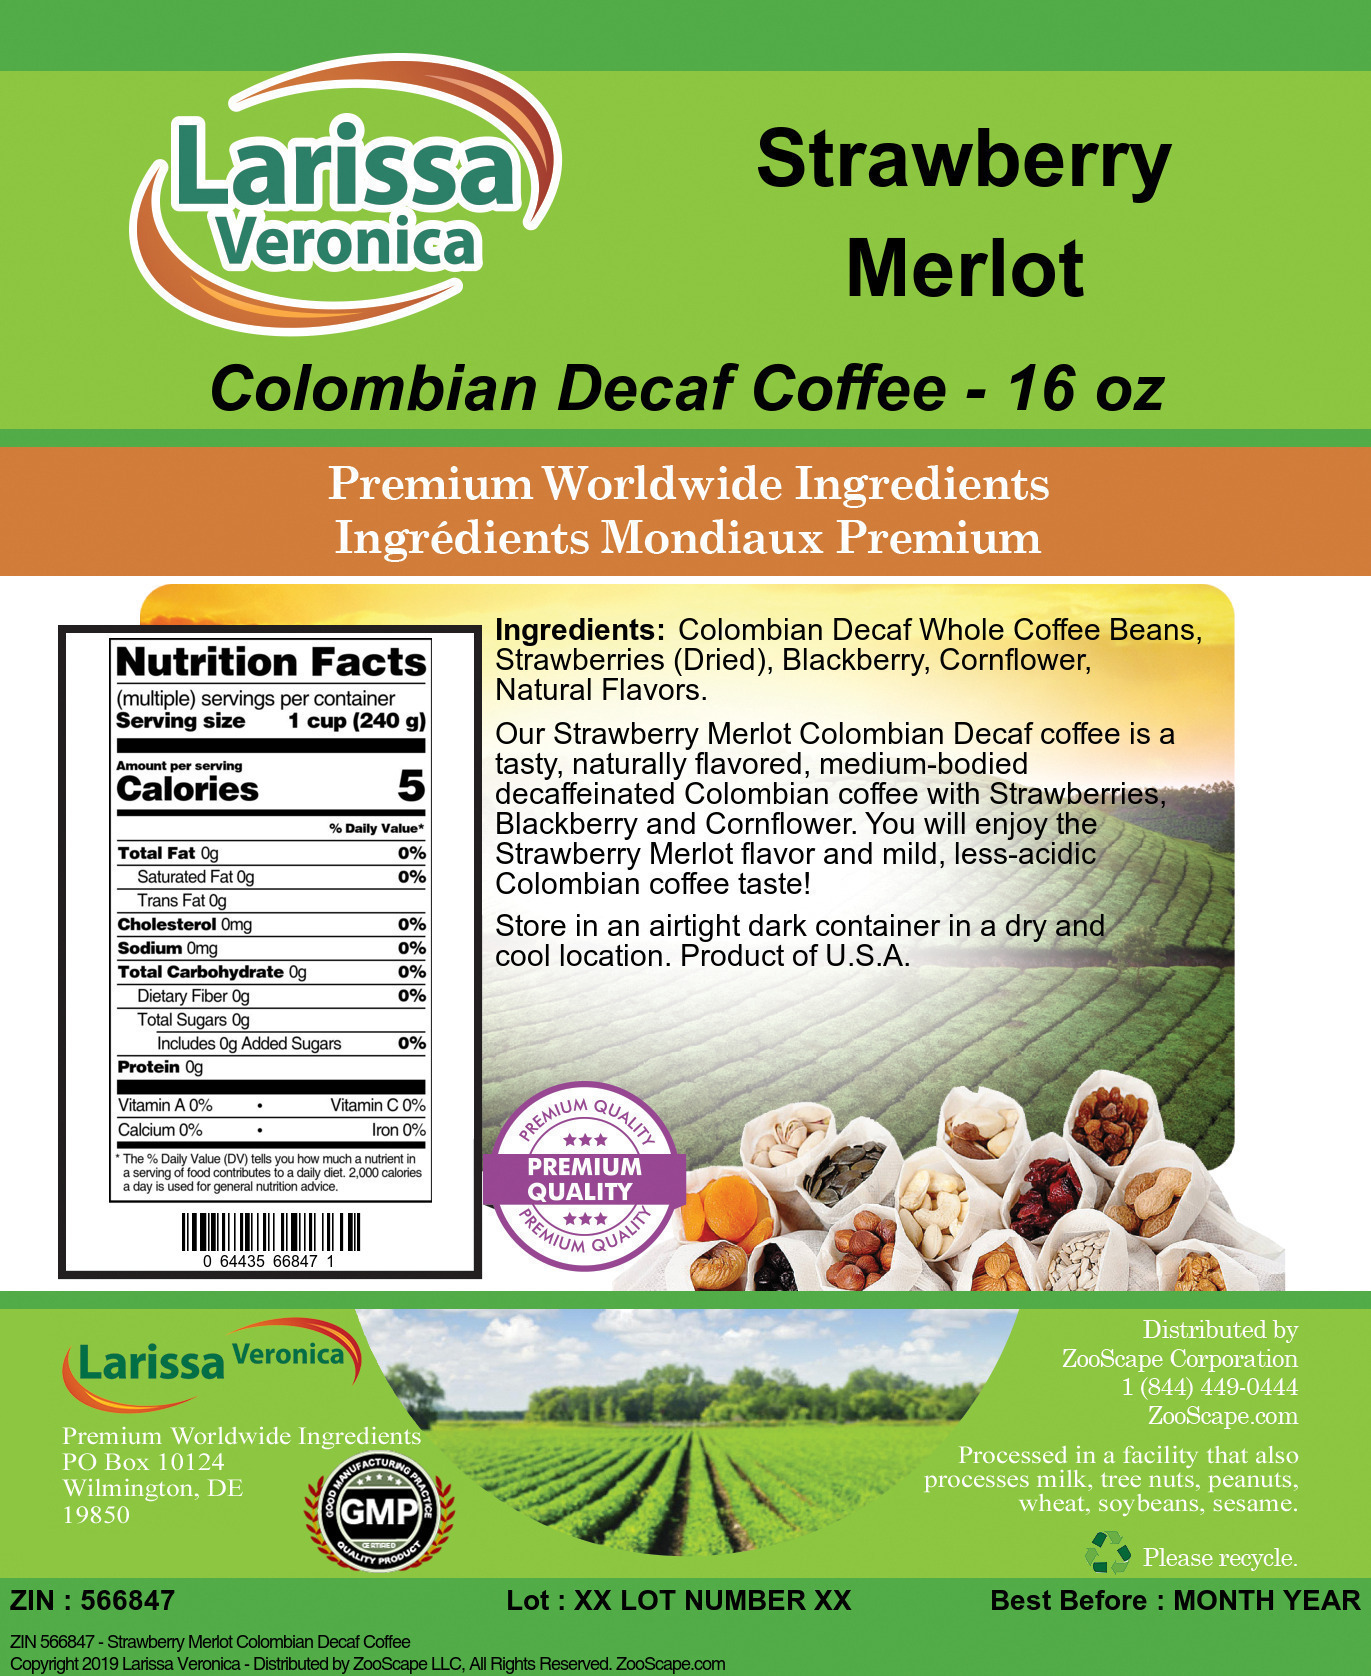 Strawberry Merlot Colombian Decaf Coffee - Label